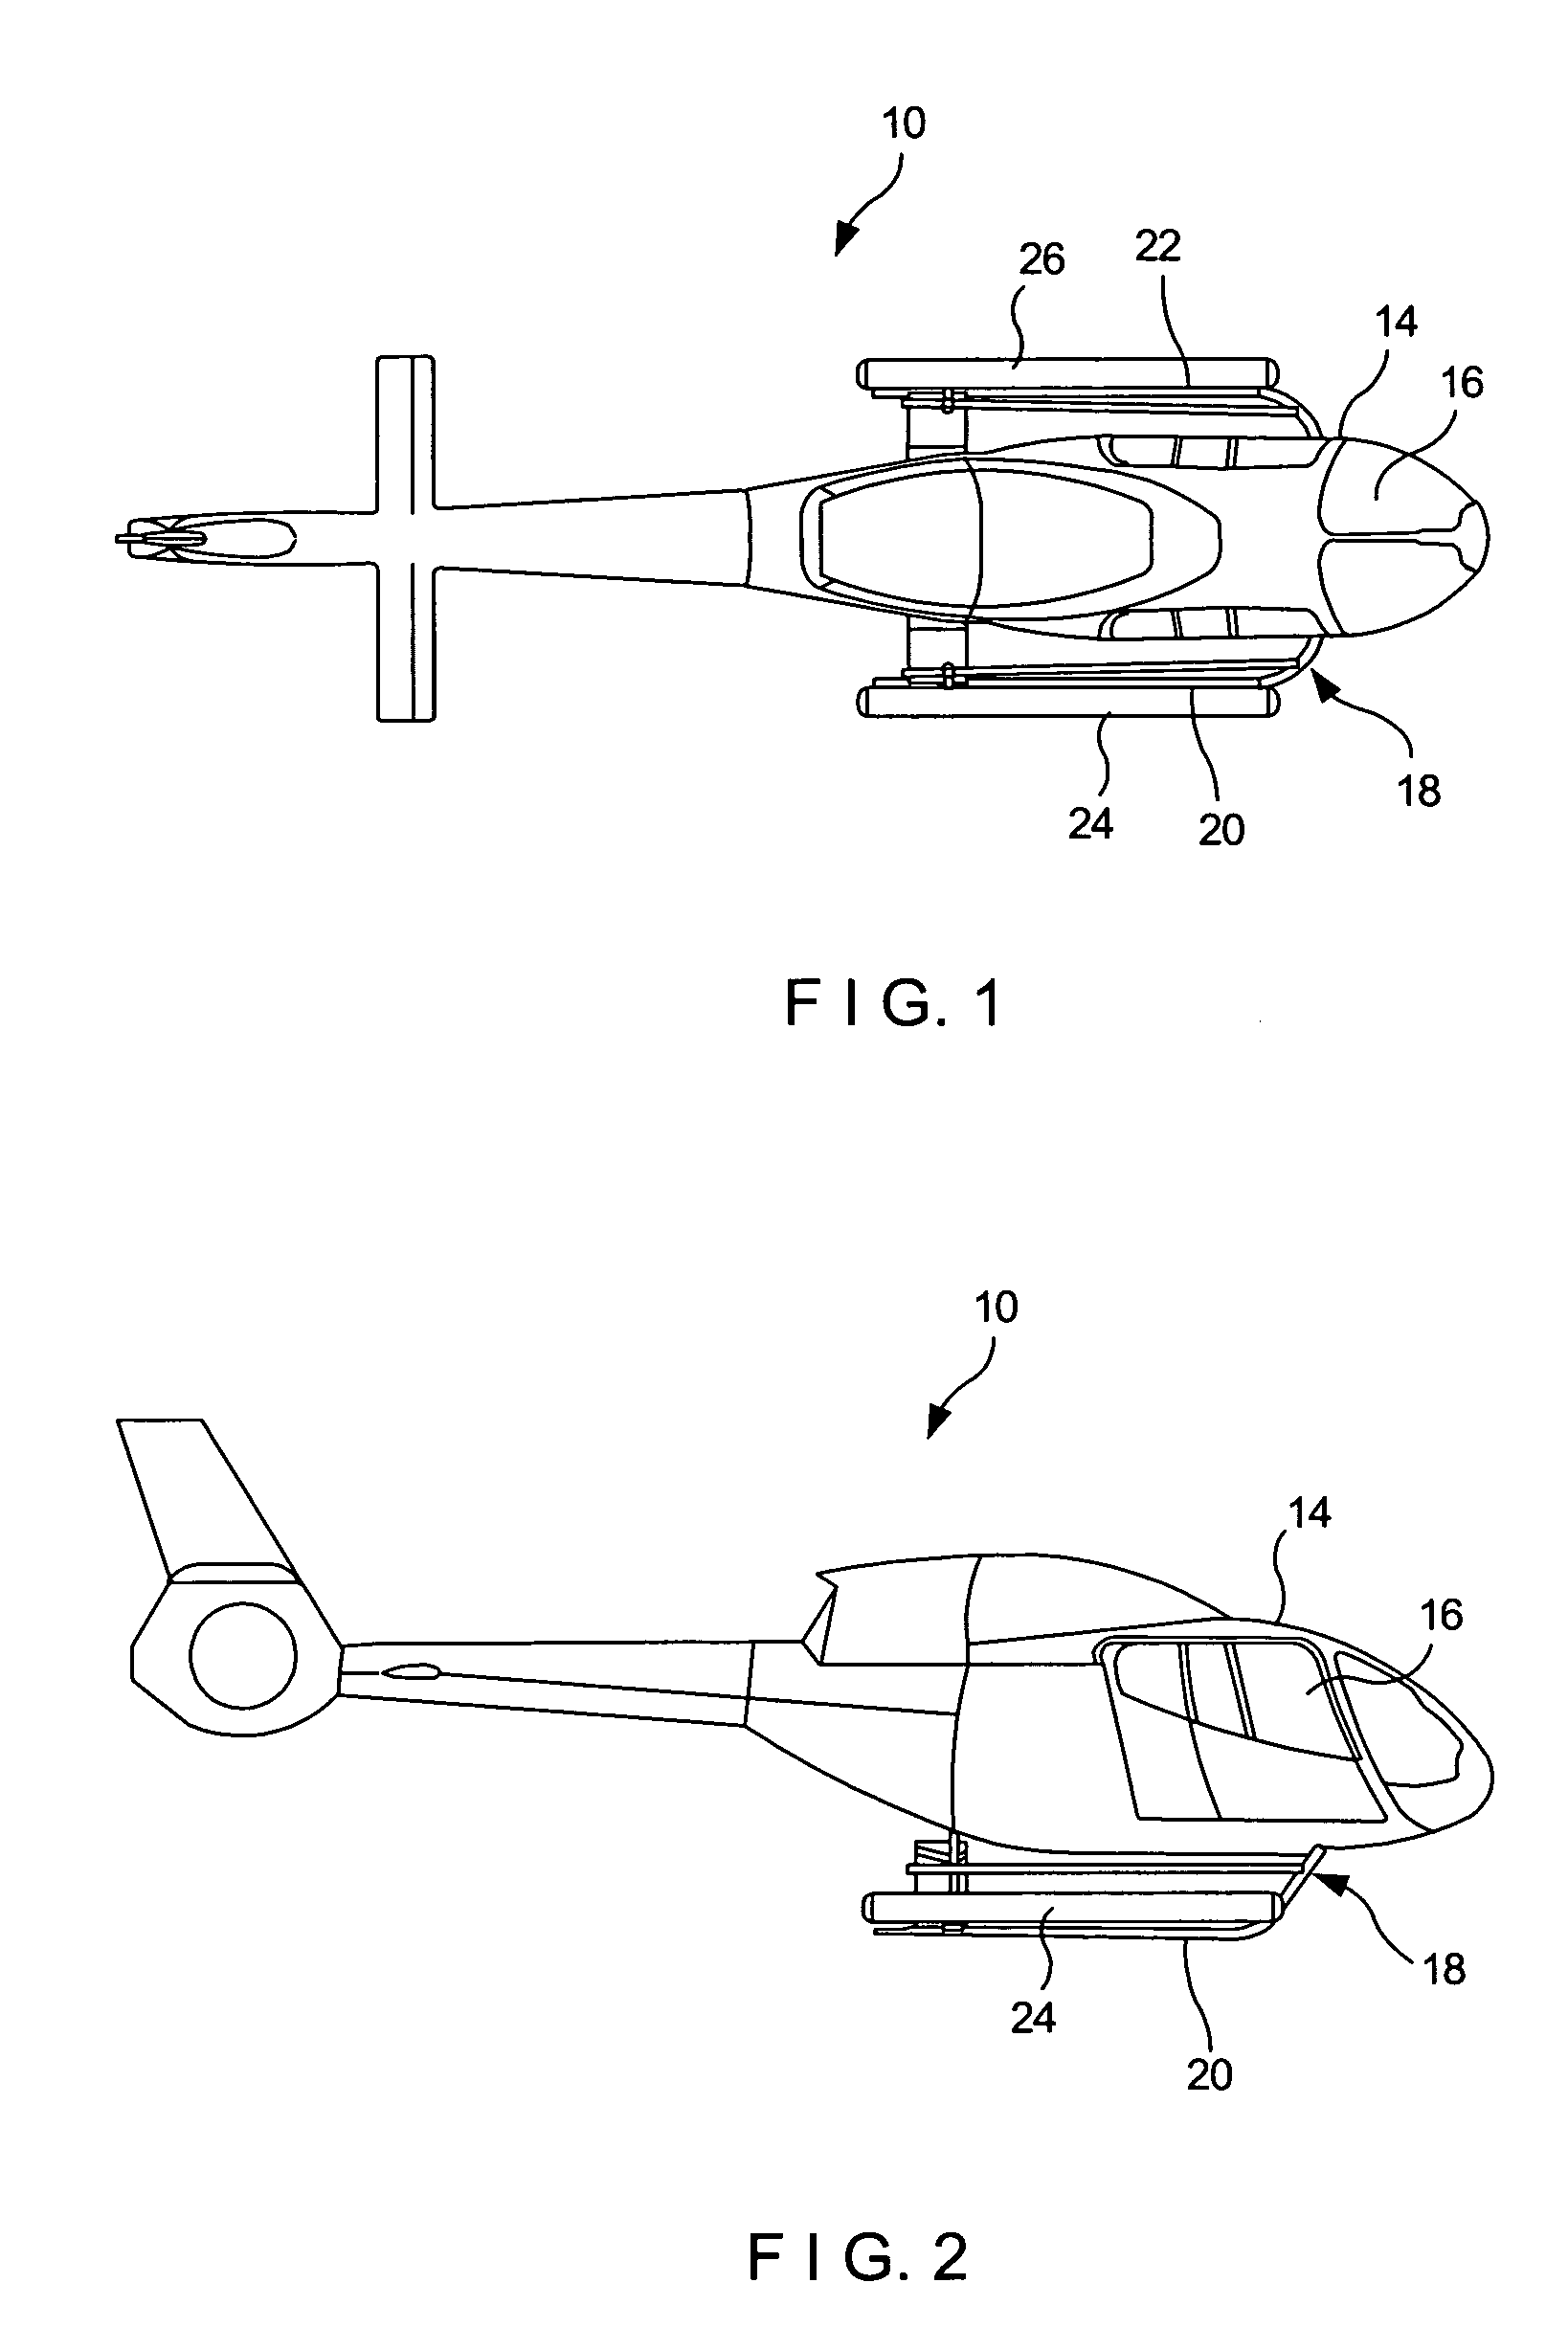 Pressurized actuator system for inflatable structures